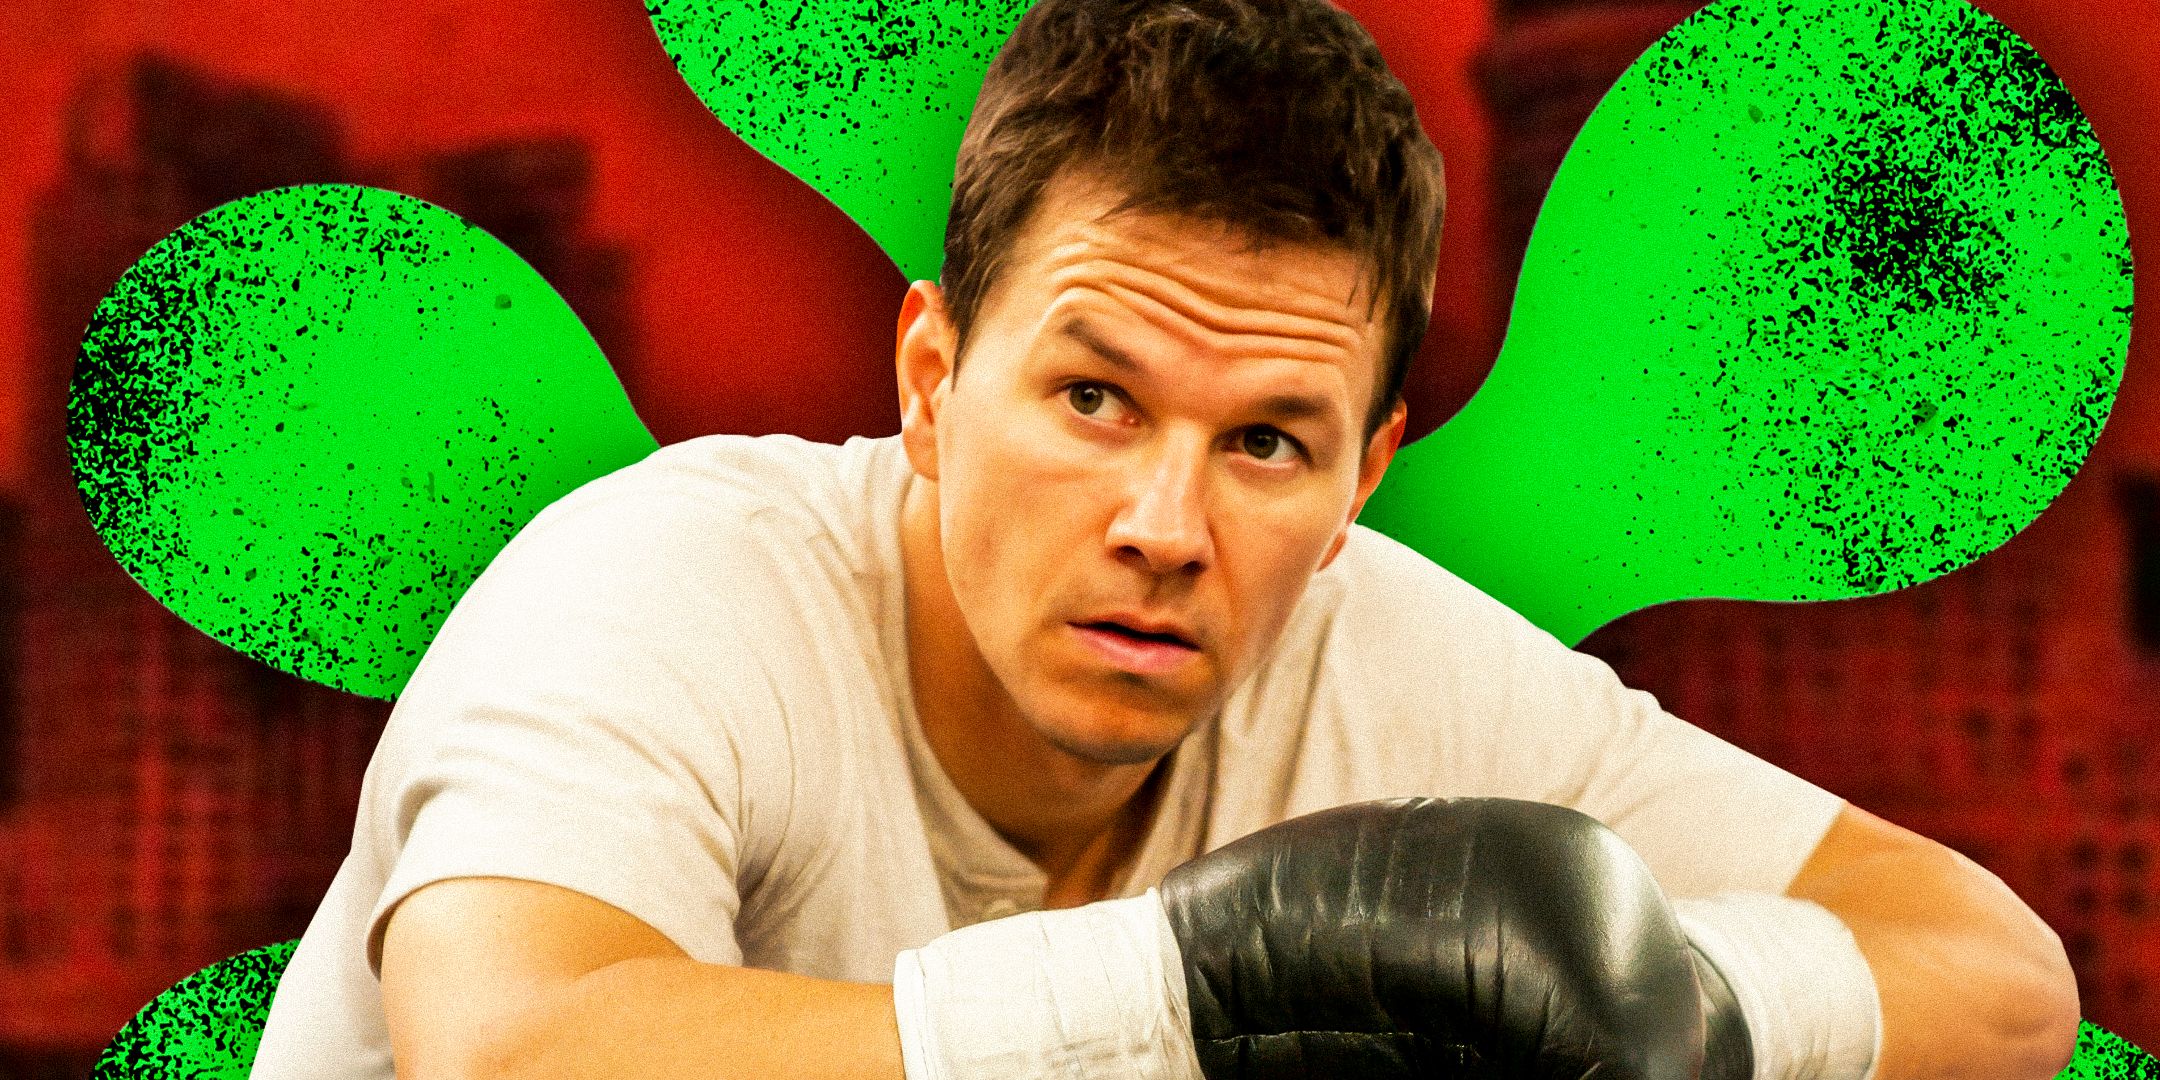 Mark-Wahlberg-as-Micky-Ward-from-The-Fighter